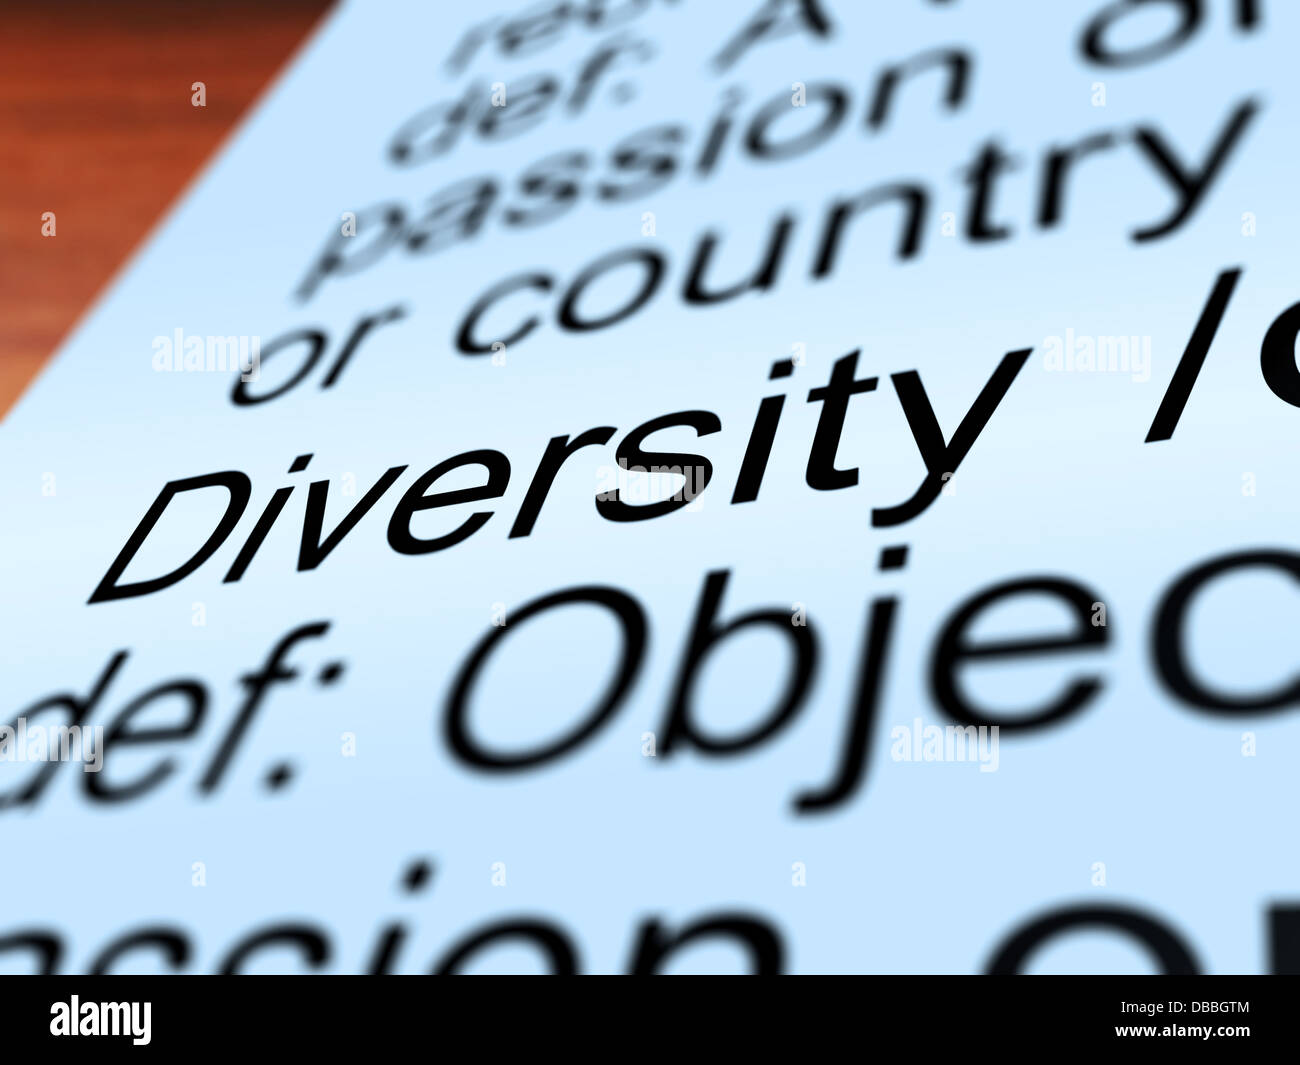 Diversity Definition Closeup Showing Different Or Diverse Stock Photo